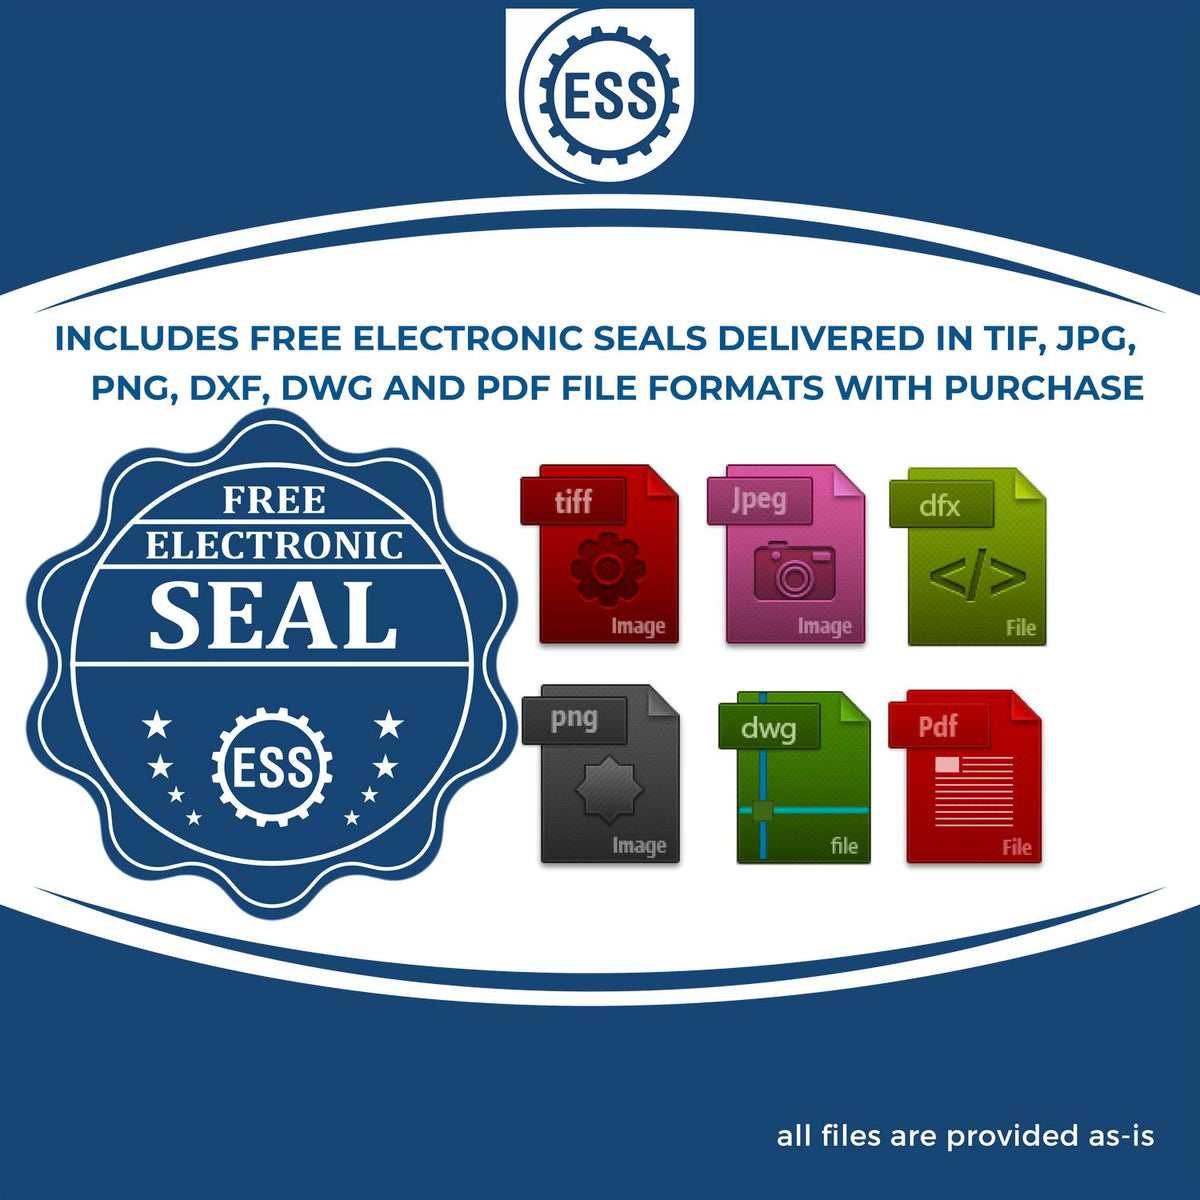 An infographic for the free electronic seal for the Premium MaxLight Pre-Inked Hawaii Landscape Architectural Stamp illustrating the different file type icons such as DXF, DWG, TIF, JPG and PNG.